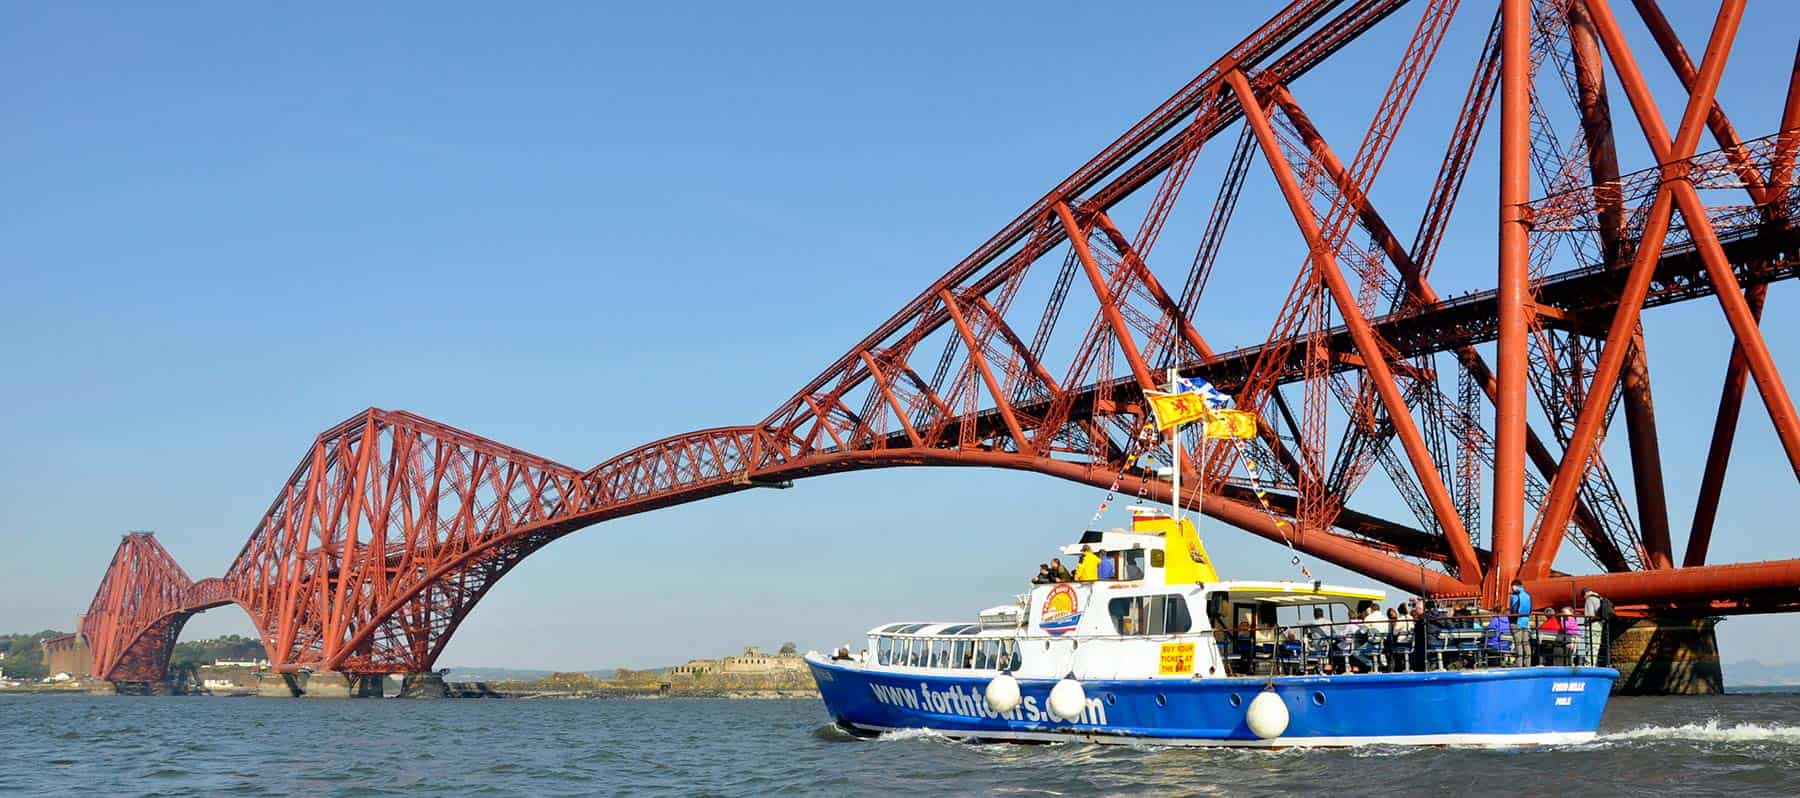 Terms & Conditions - Forth Boat Tours